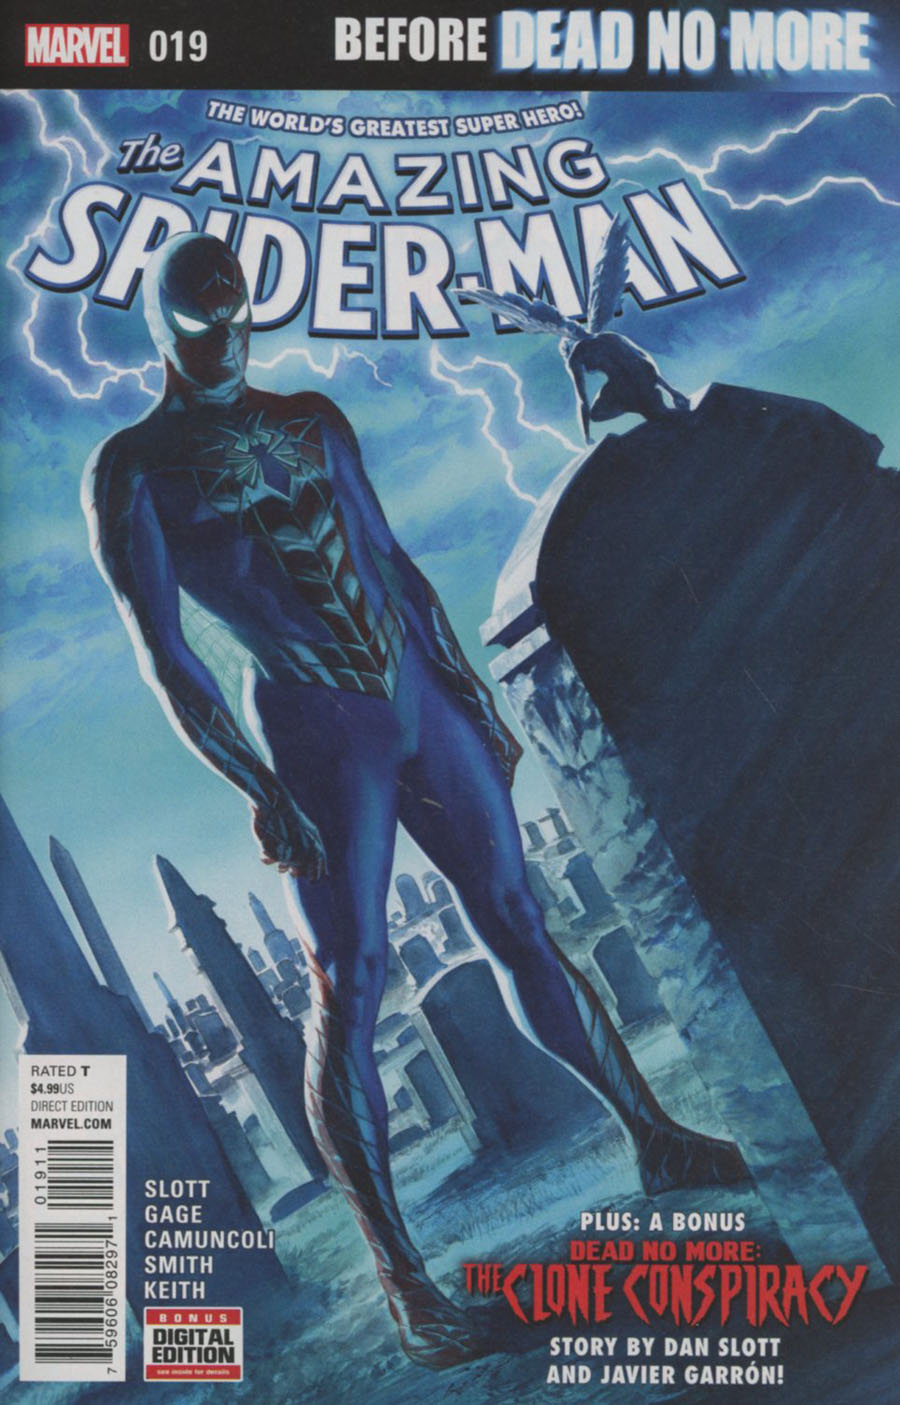 Amazing Spider-Man Vol 4 #19 Cover A 1st Ptg Regular Alex Ross Cover (Dead No More Prelude)